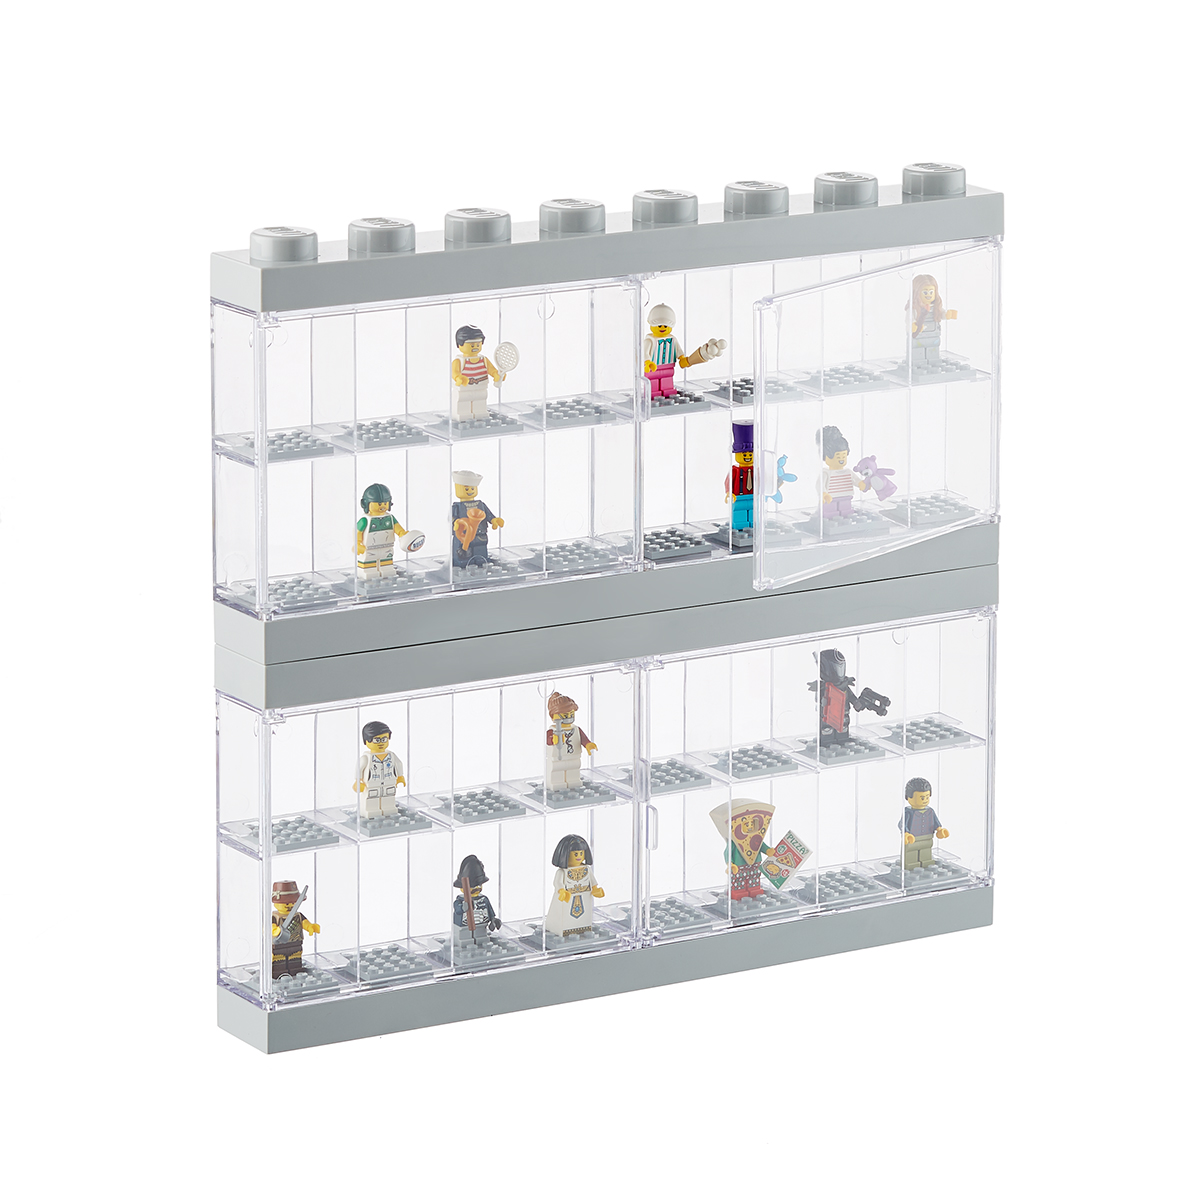 LEGO Large Minifigure Display Case | The Container Store